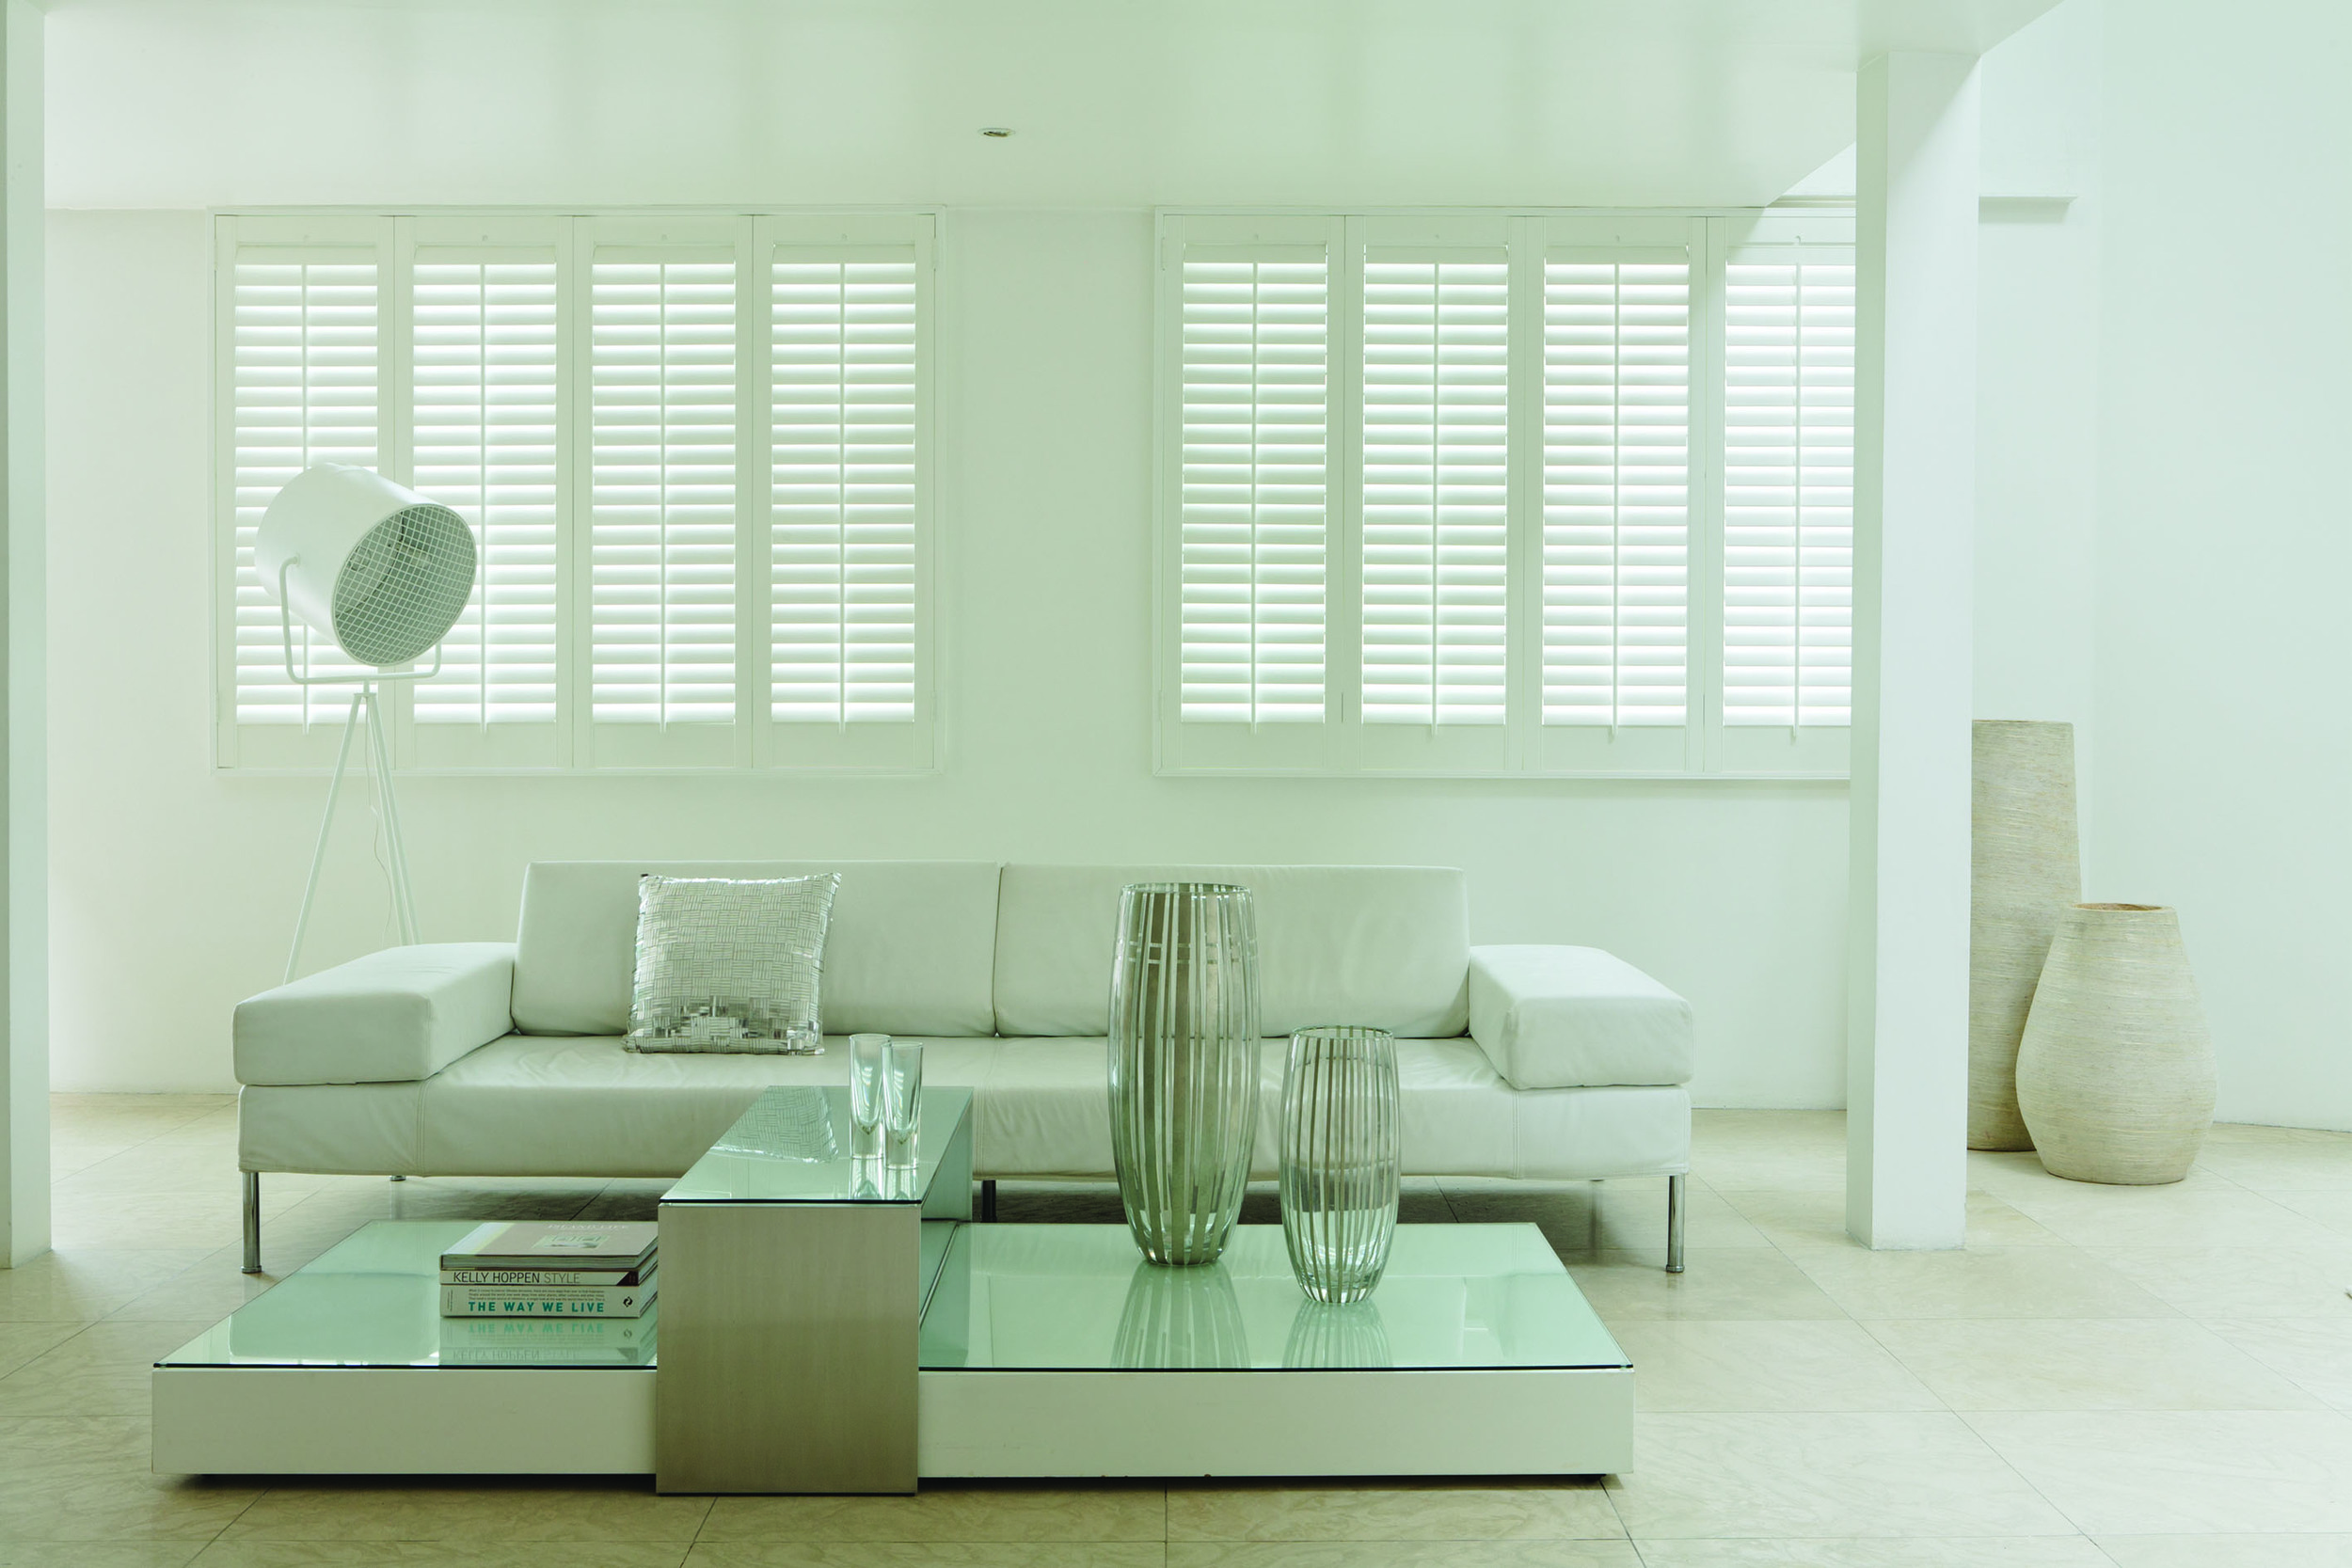   HAND CRAFTED    Window Shutters    Contact Us Today  